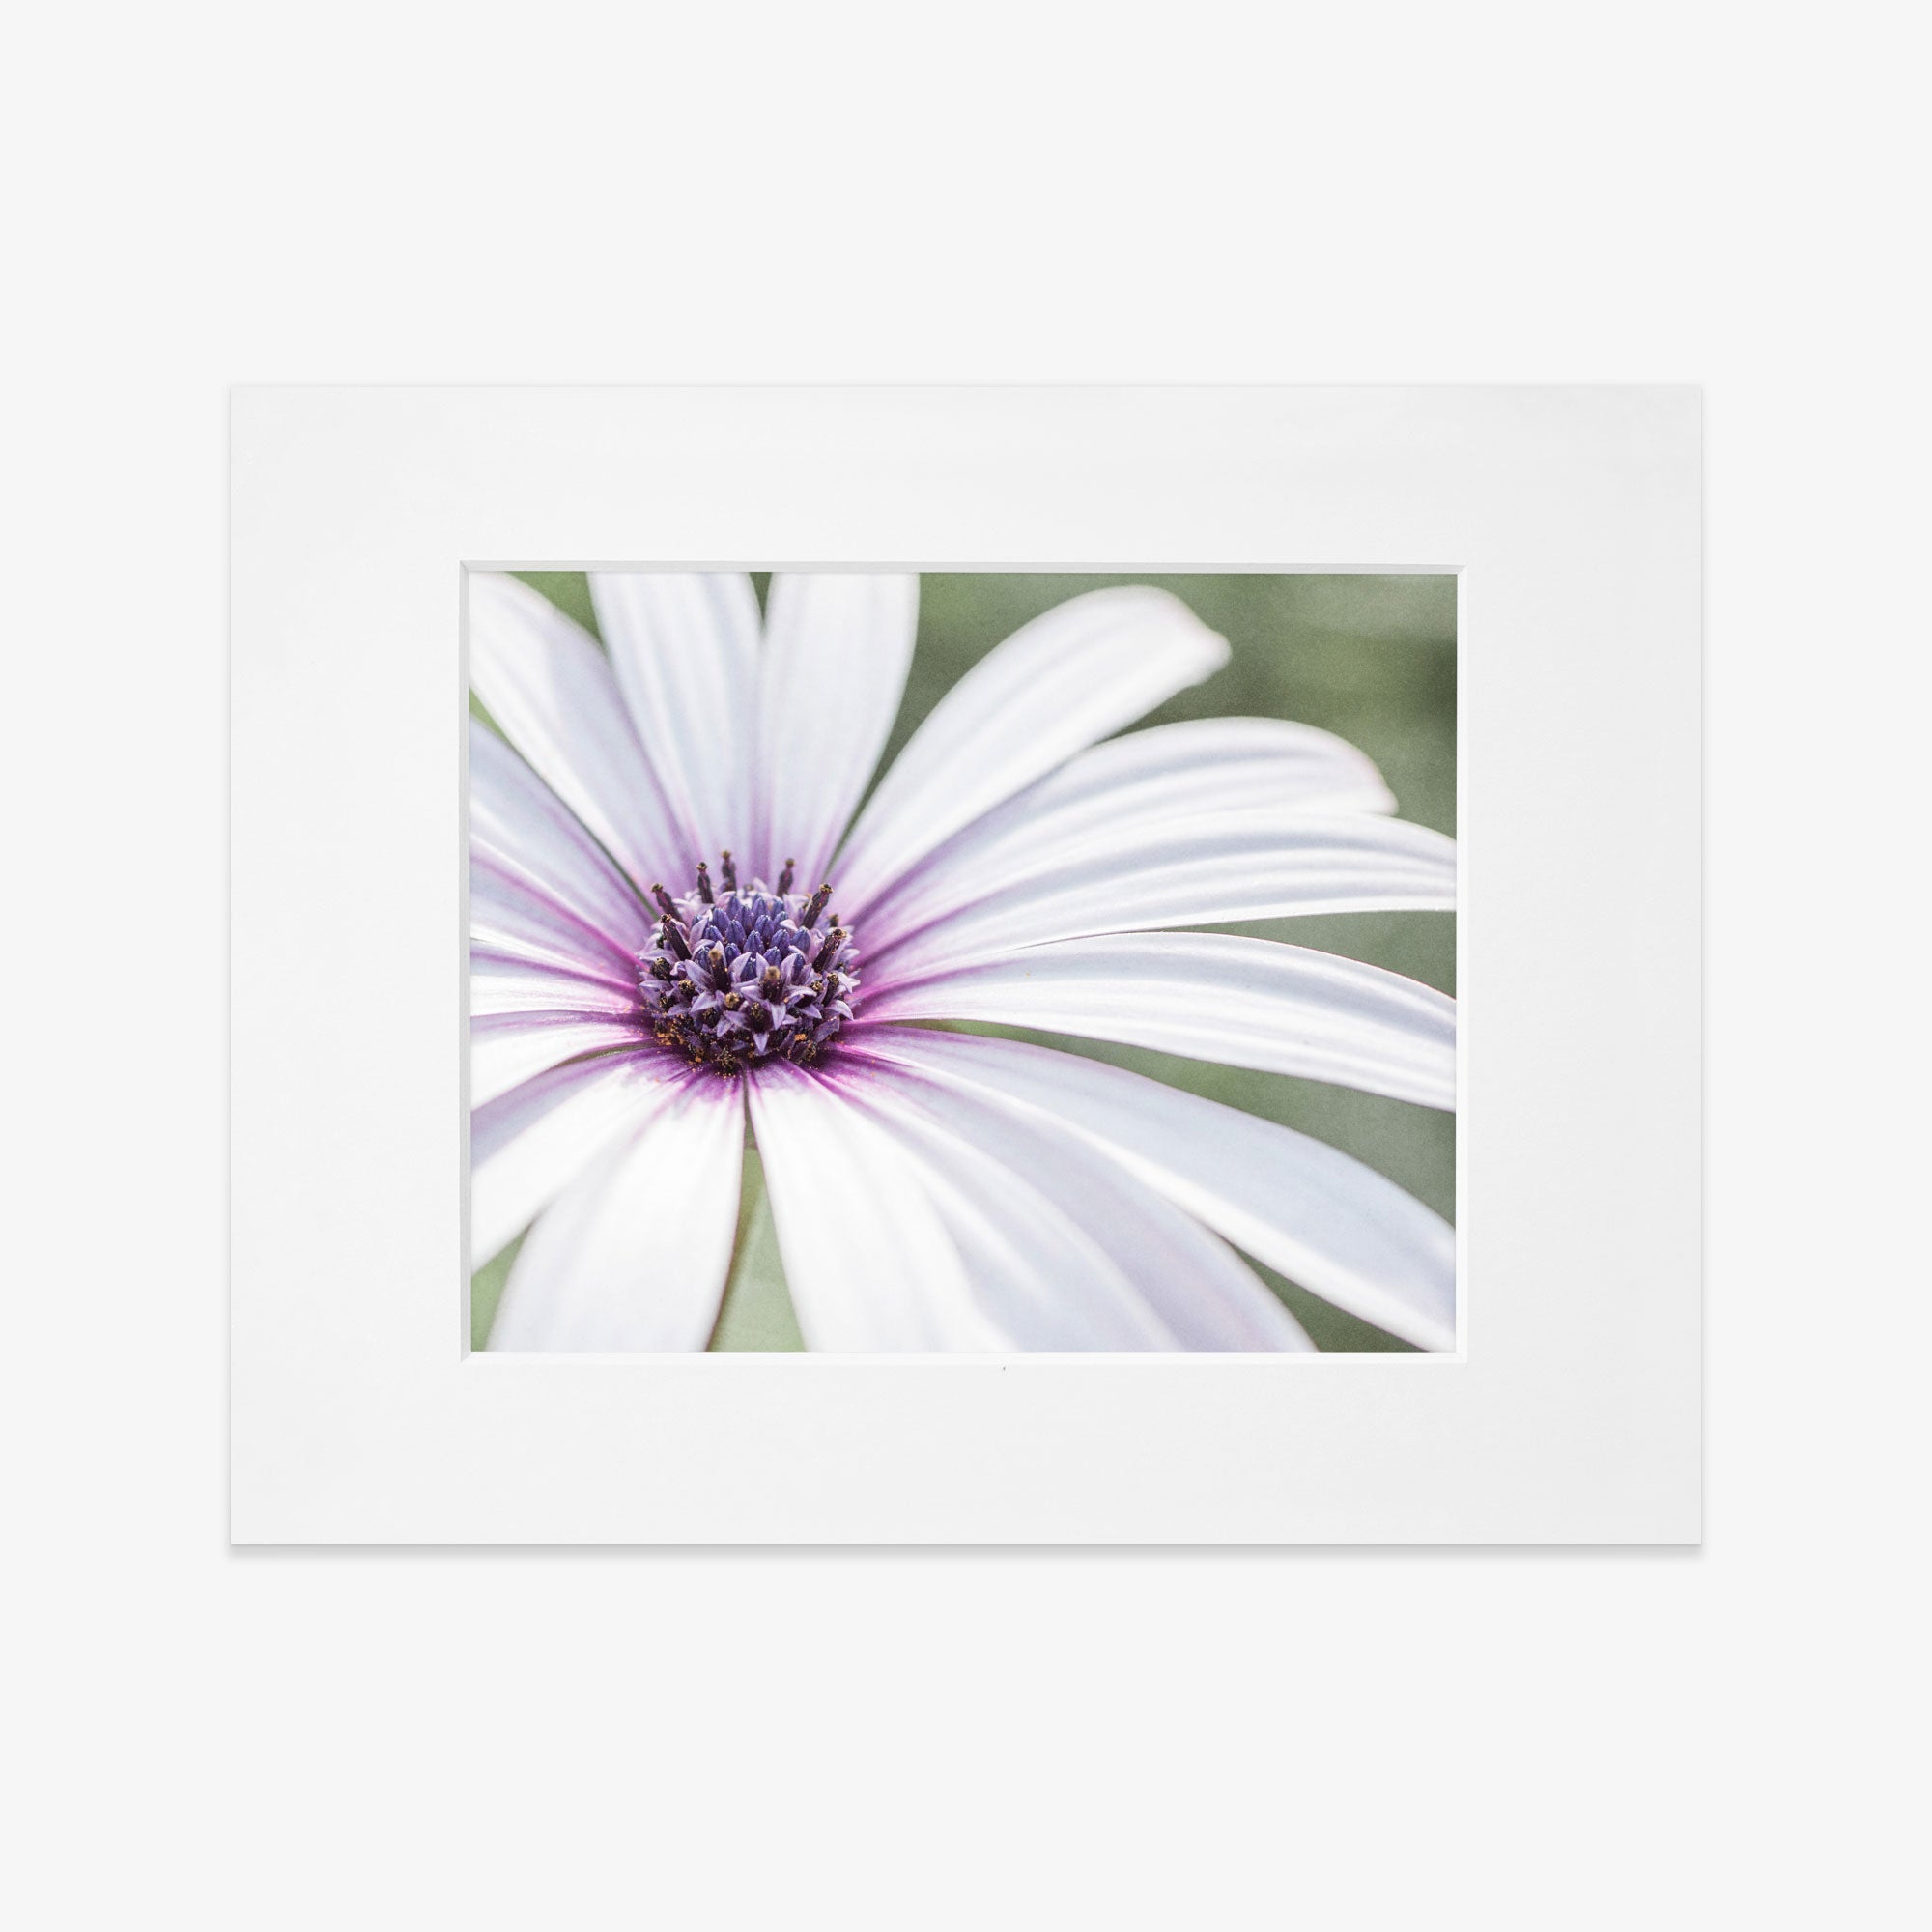 Close-up photo of a Large White Daisy Flower Print with purple stripes on its petals and a purple center, printed on archival photographic paper by Offley Green.